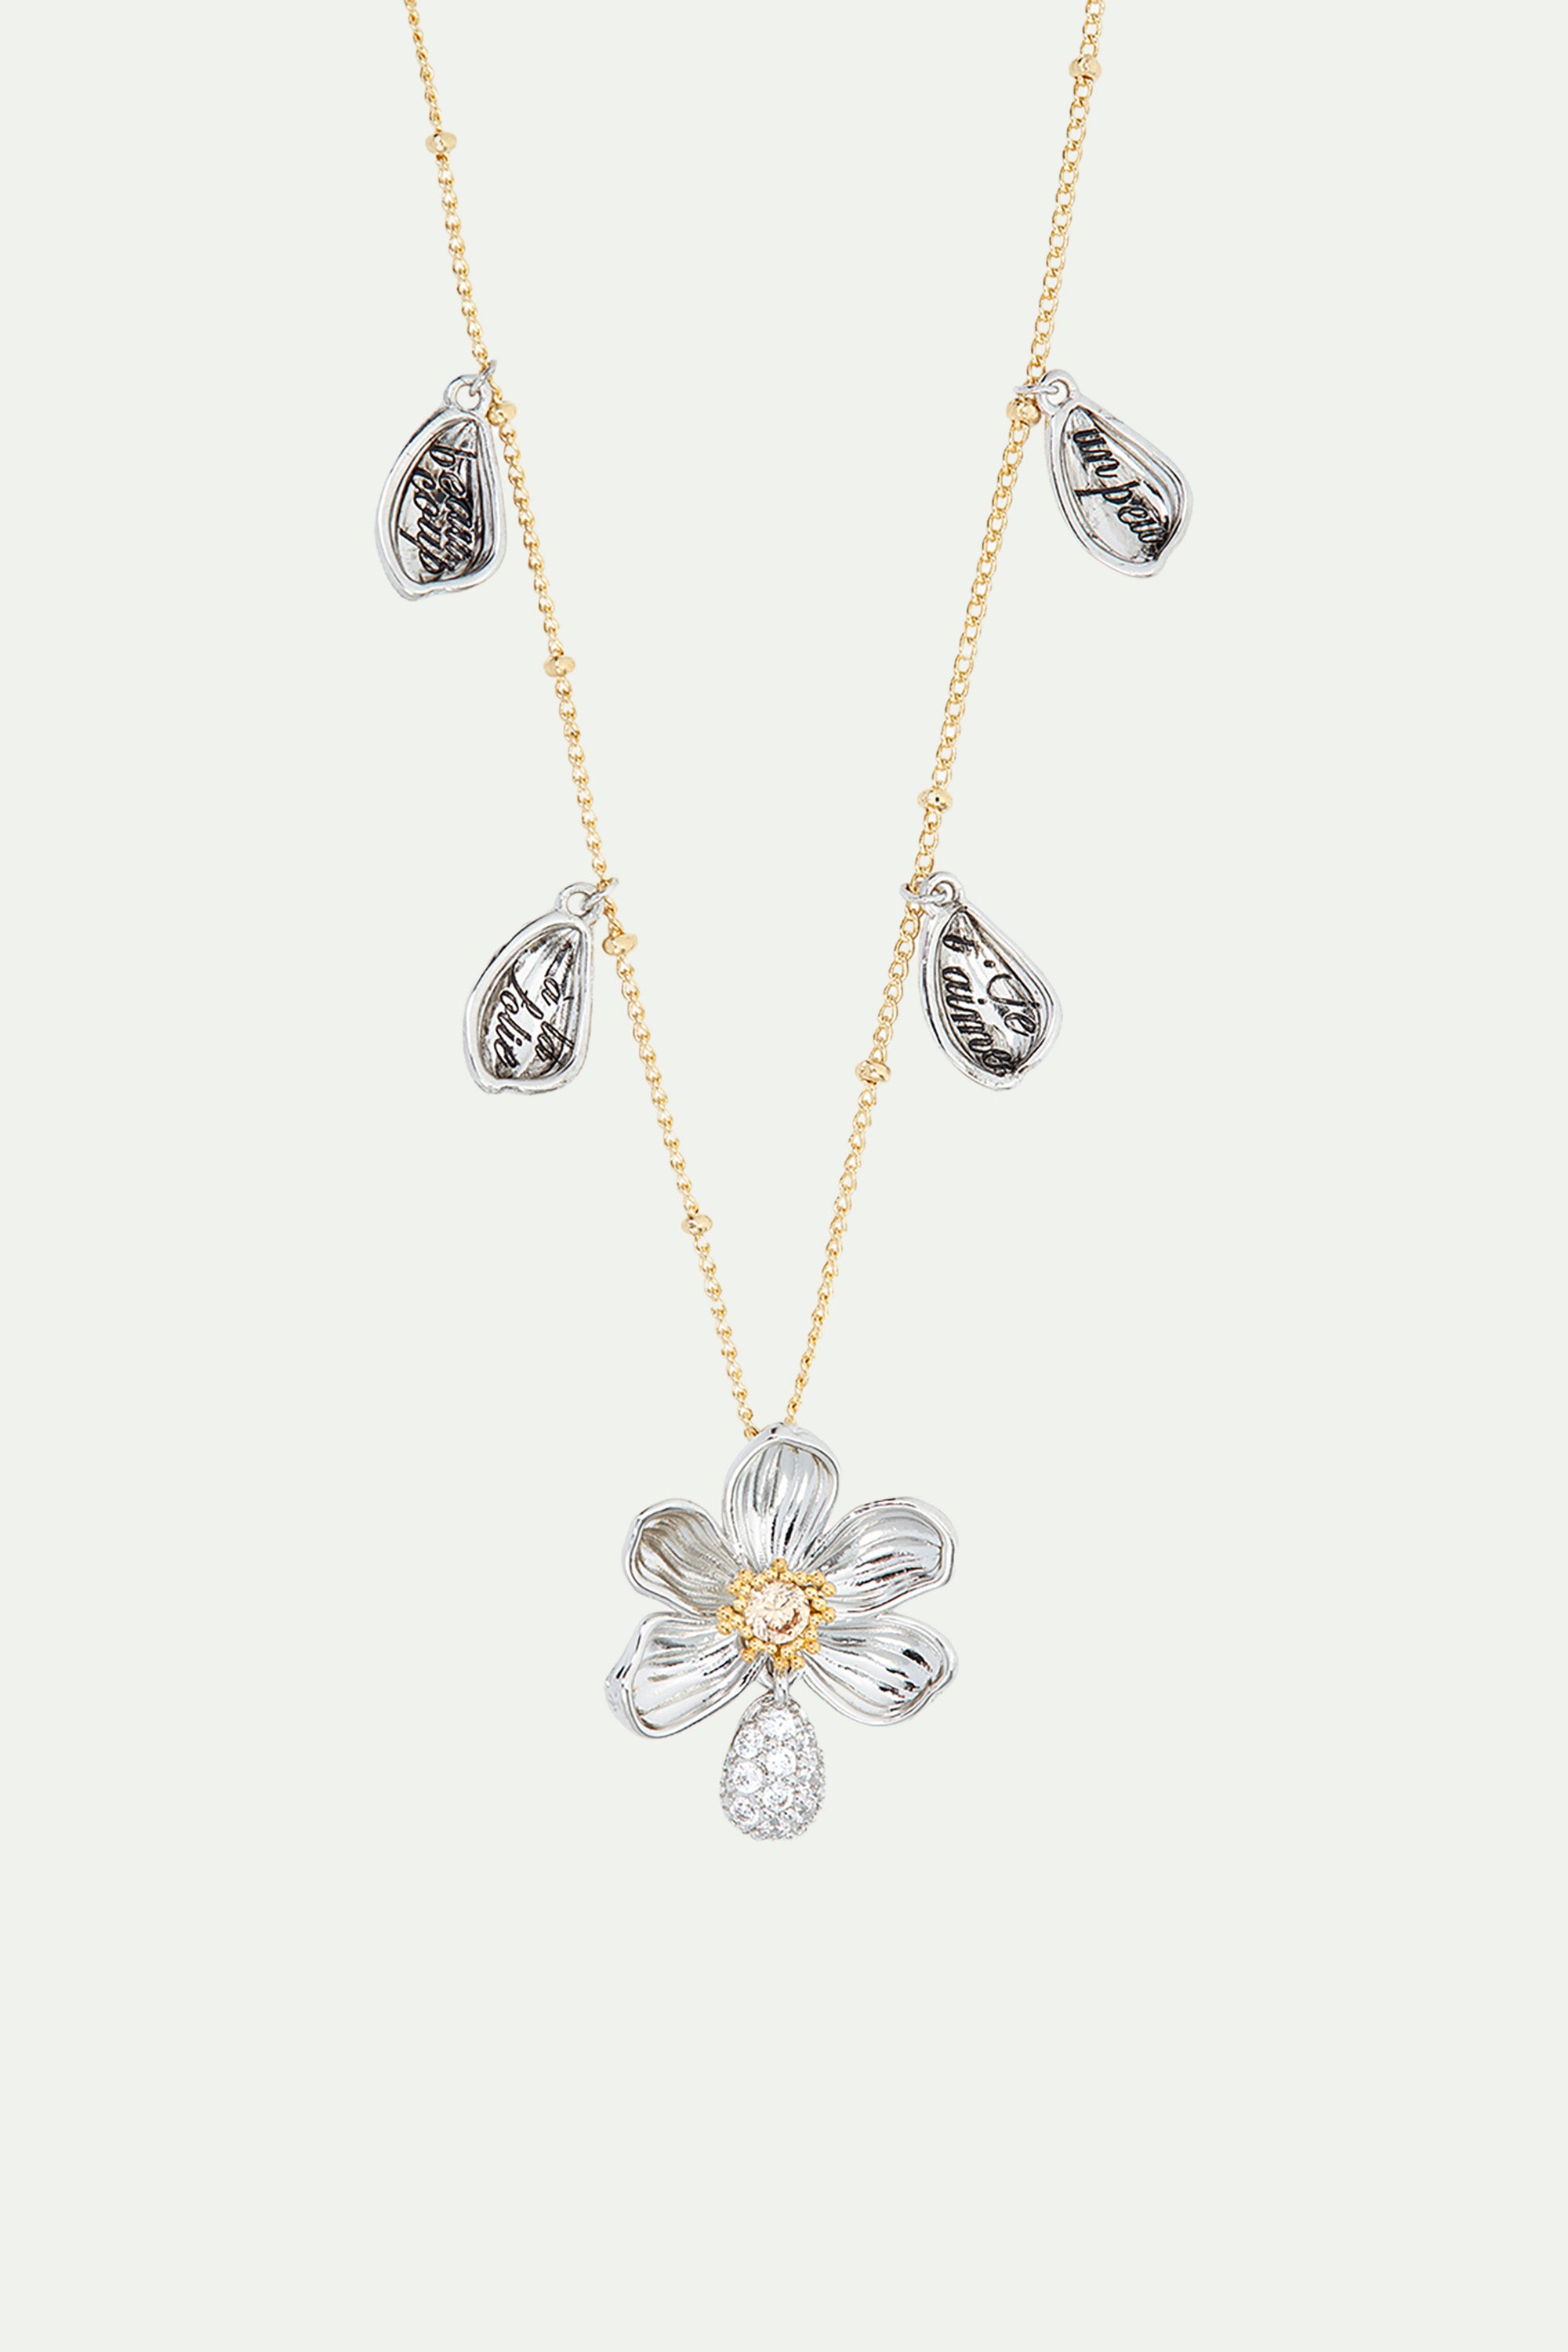 Daisy and engraved petal pendant necklace